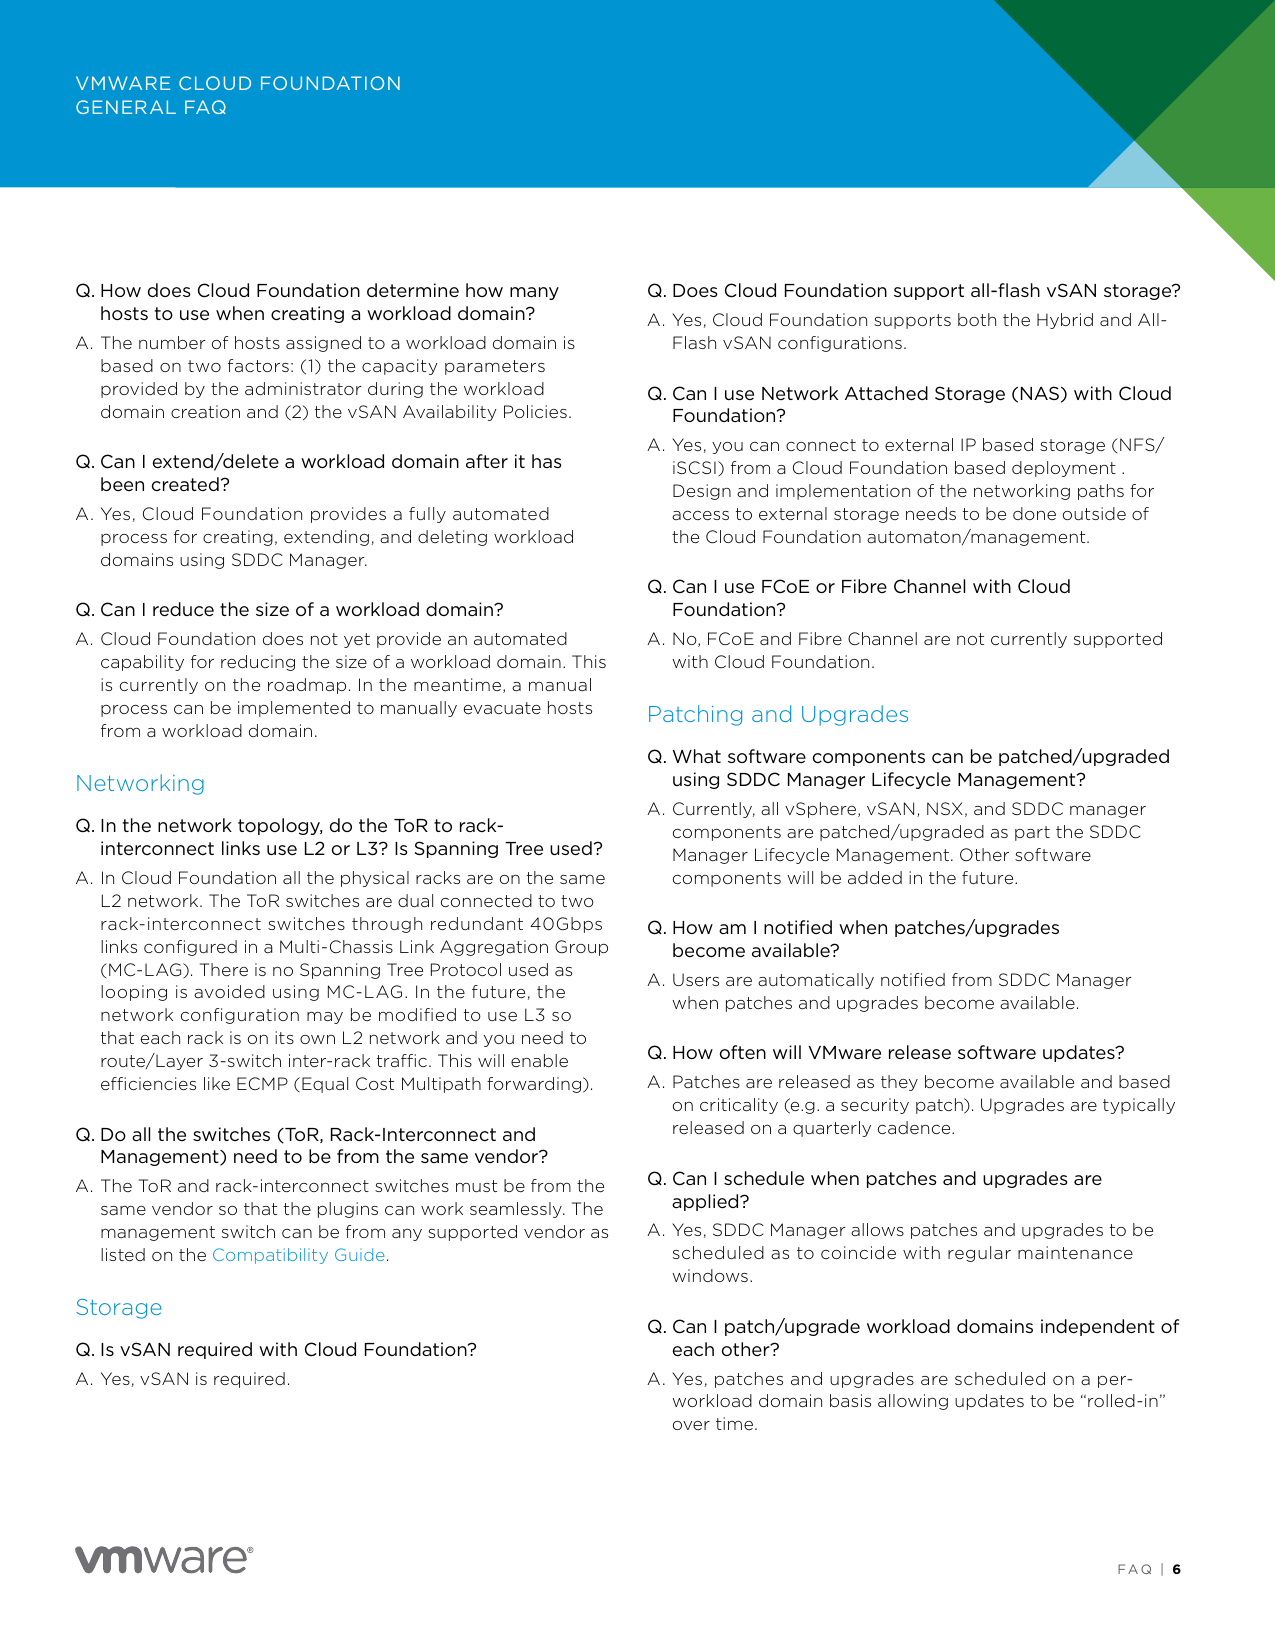 Page 6 of 7 - VMware Cloud Foundation General FAQ Vmware-cloud-foundation-faq